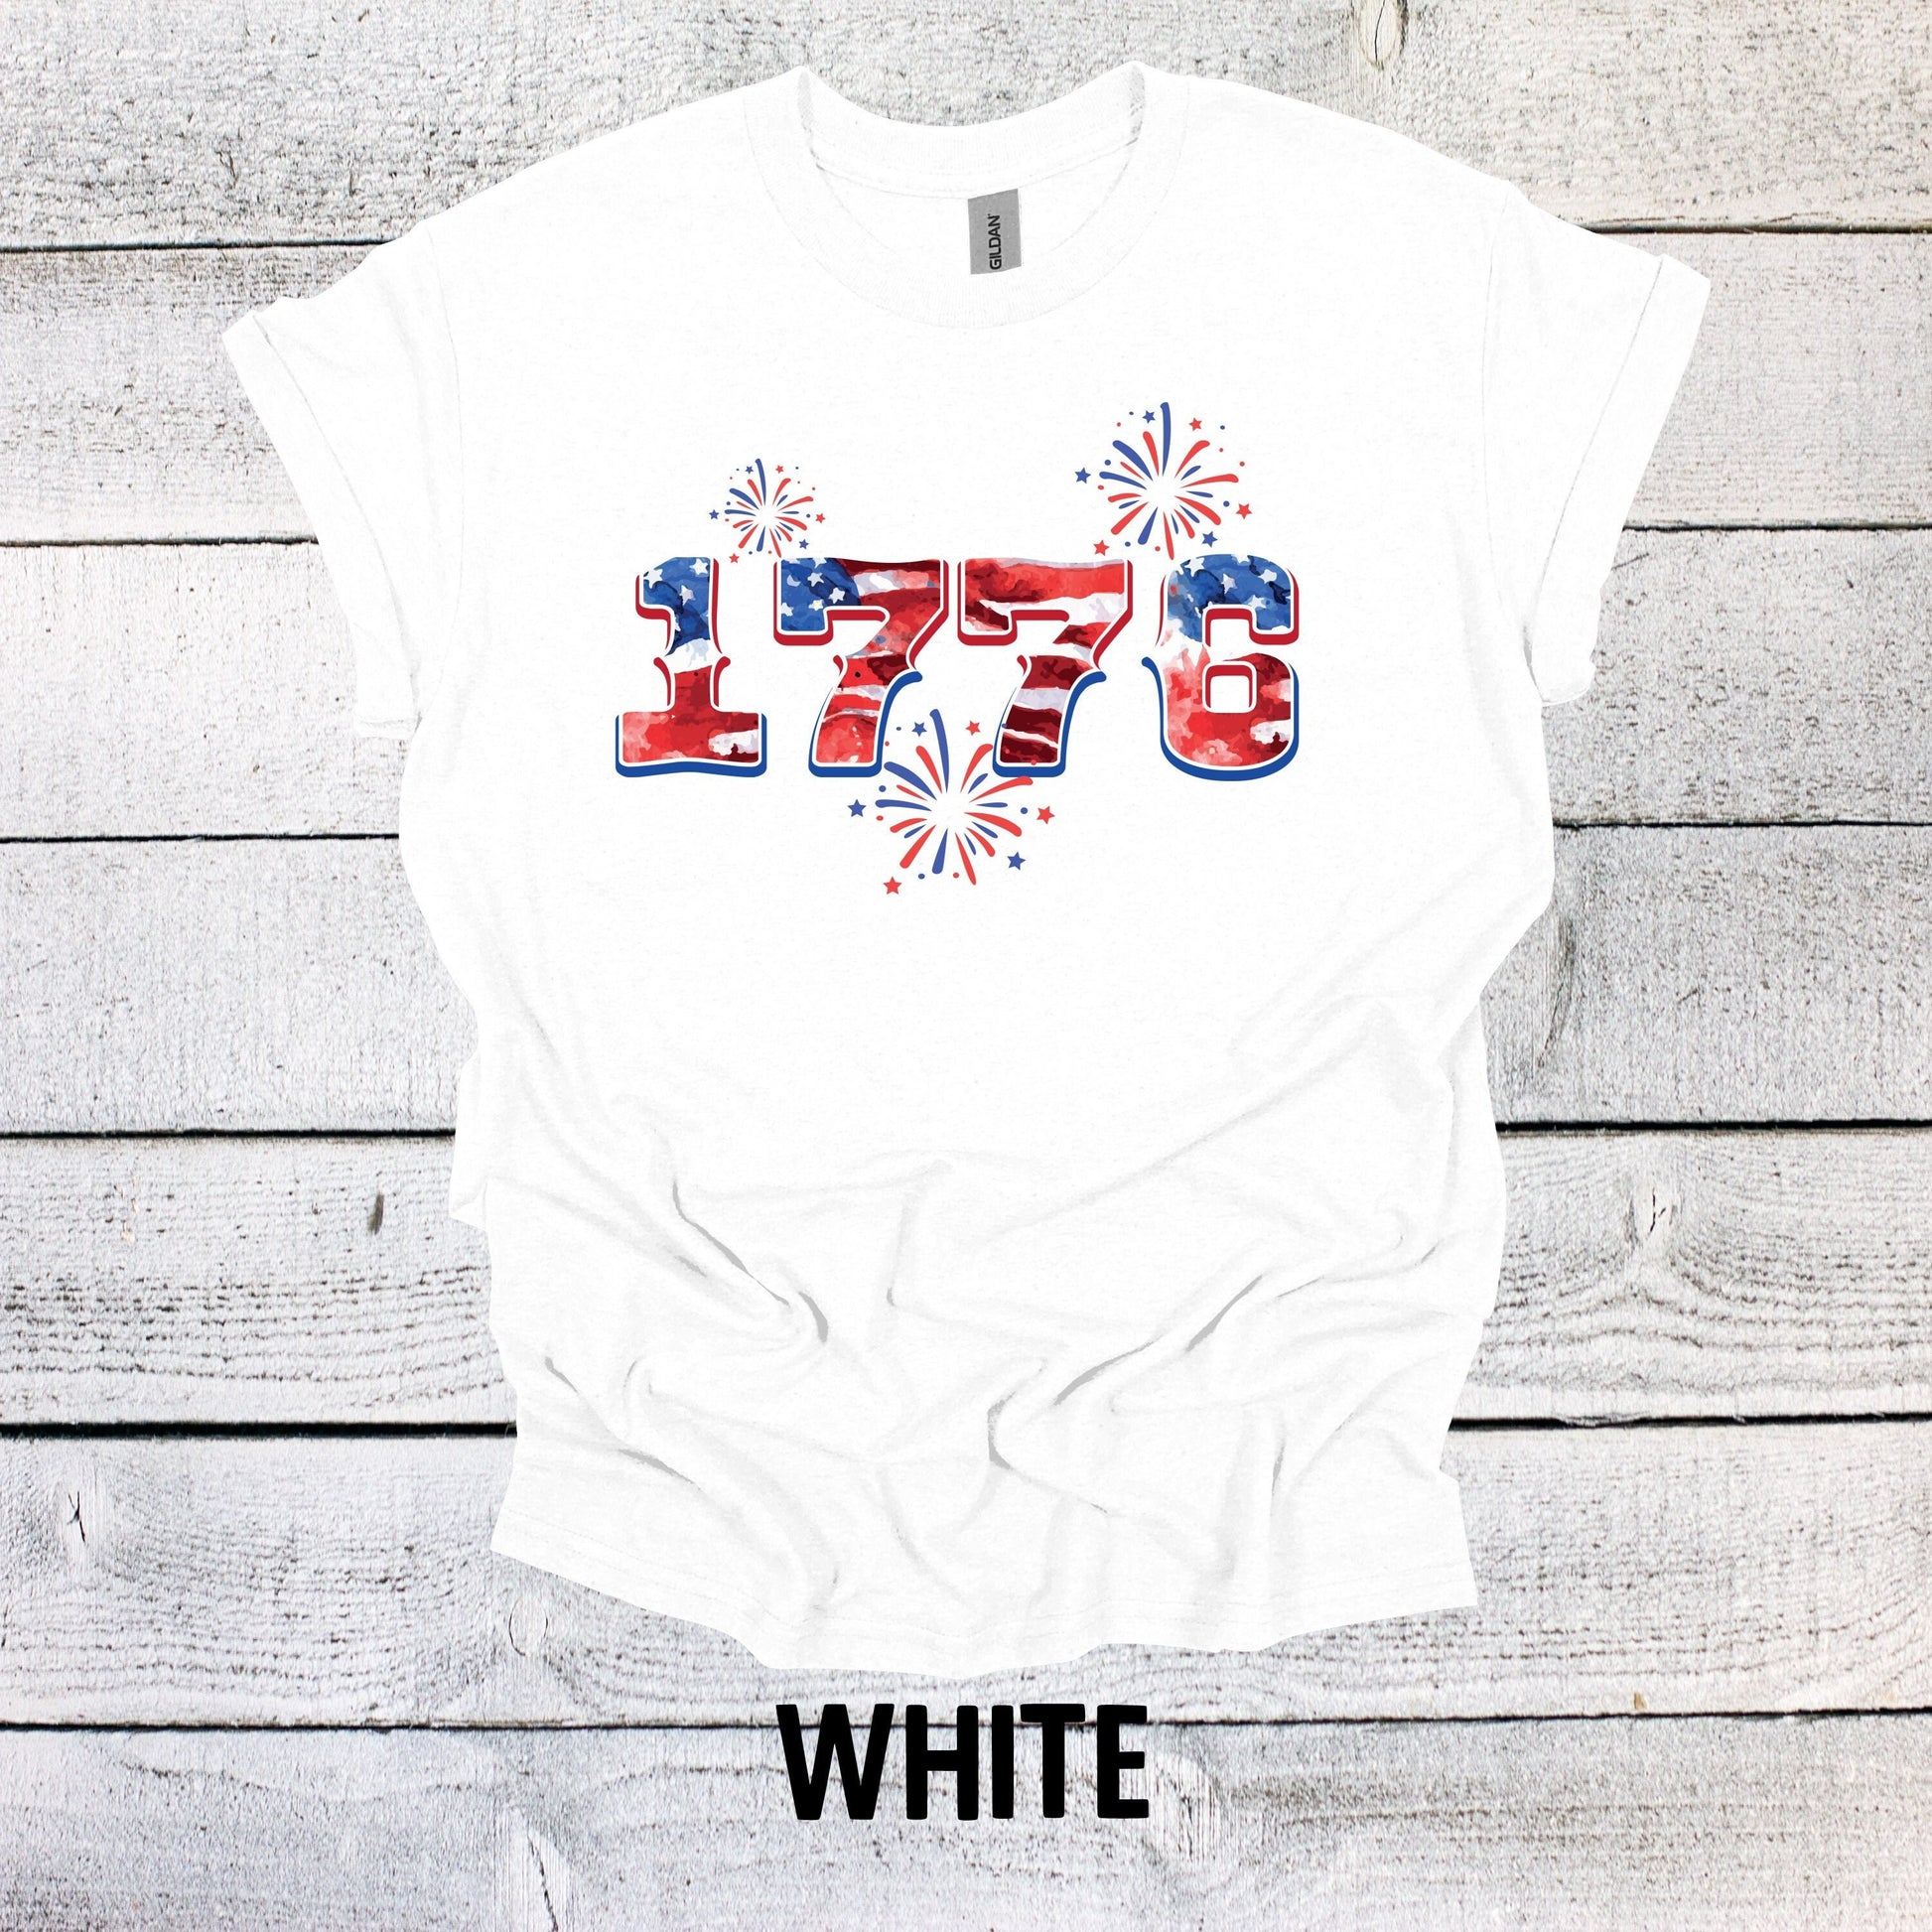 1776 Red, White, and Blue July 4th Shirt - Celebrate Independence Day in Style